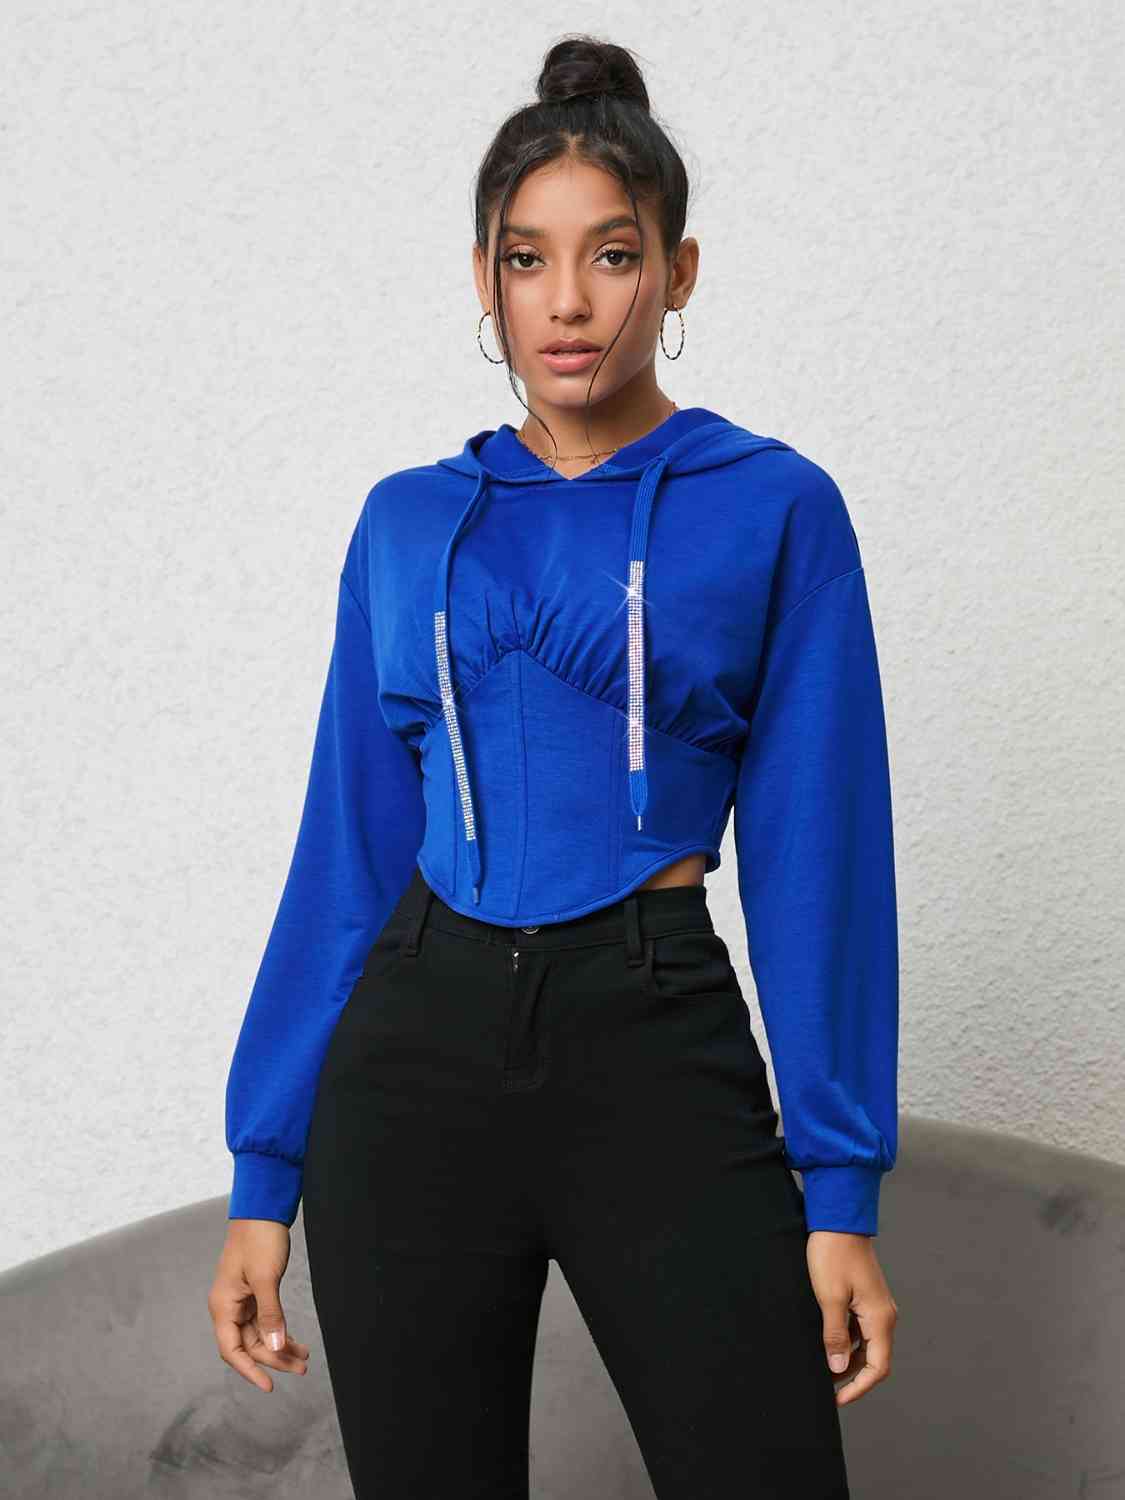 Long Sleeve Drawstring Hoodie - Royal Blue / S - Women’s Clothing & Accessories - Shirts & Tops - 1 - 2024